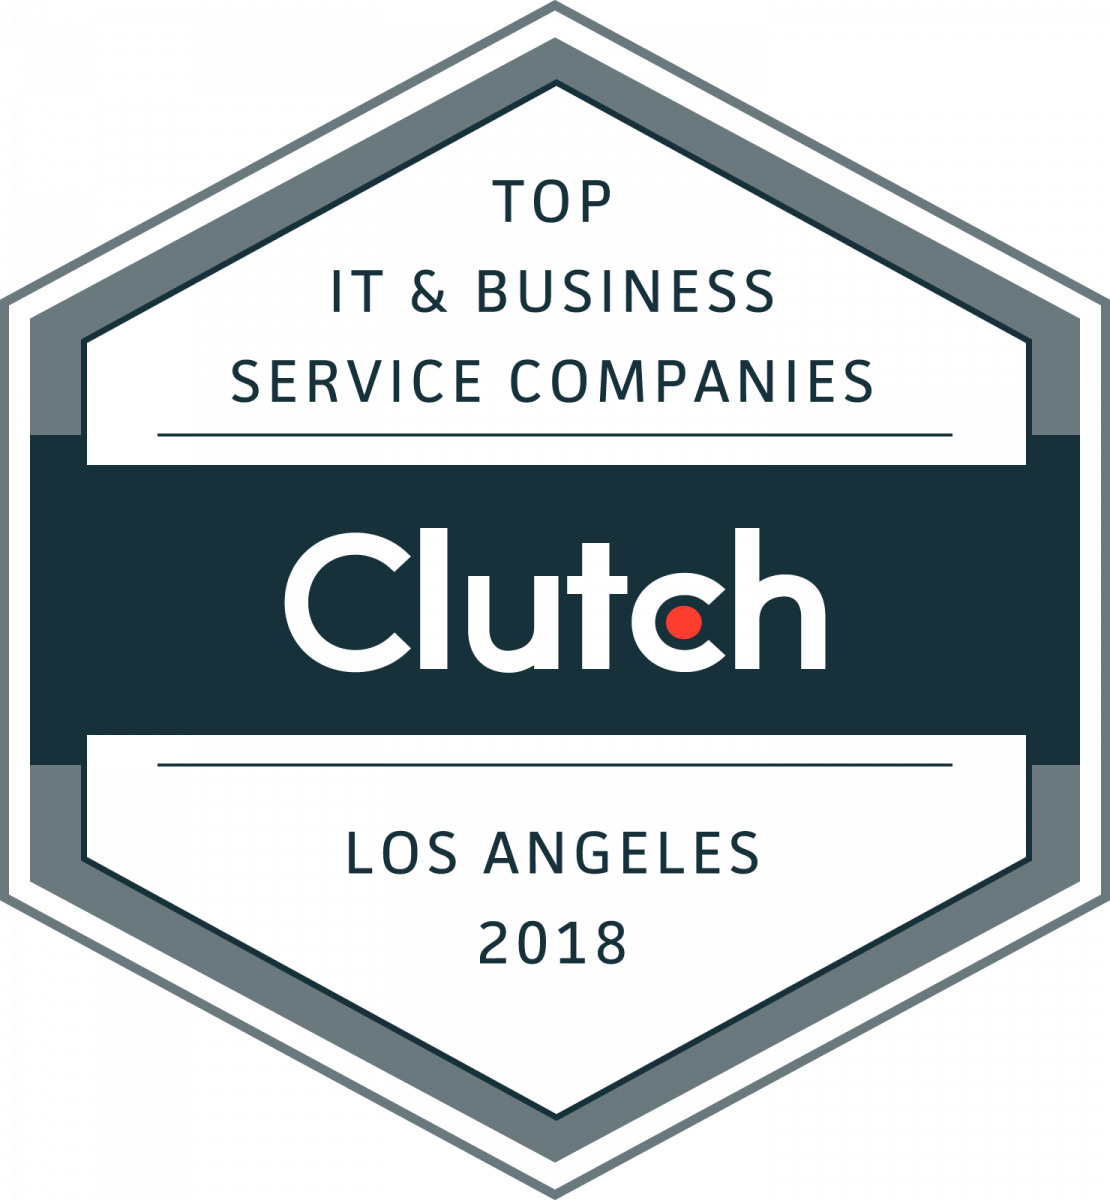 Top IT & Business Service Companies Badge Los Angeles 2018